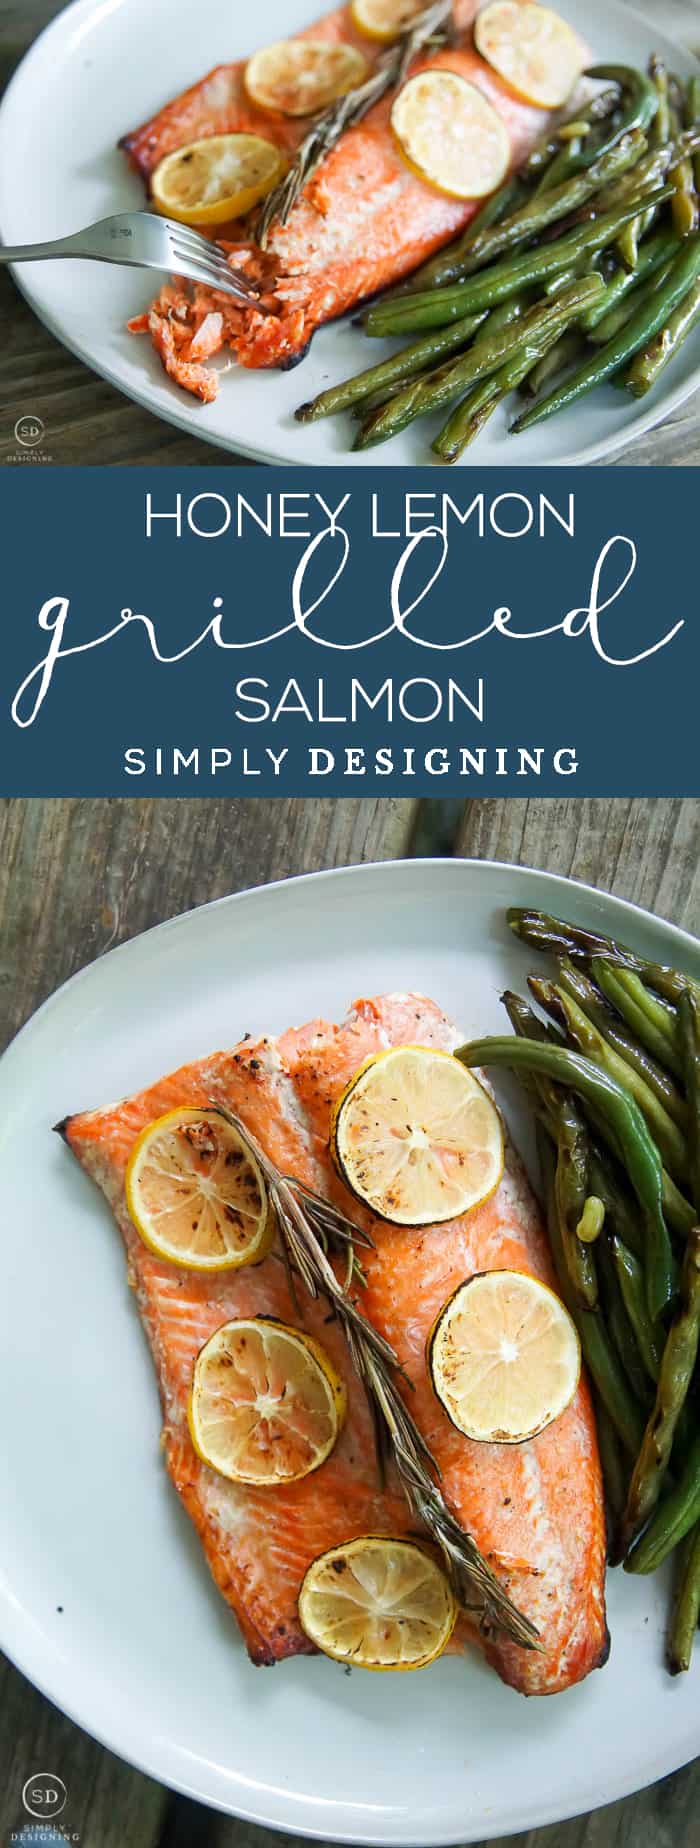 This honey lemon grilled salmon recipe is the perfect recipe to make salmon in foil with a delicious glaze recipe